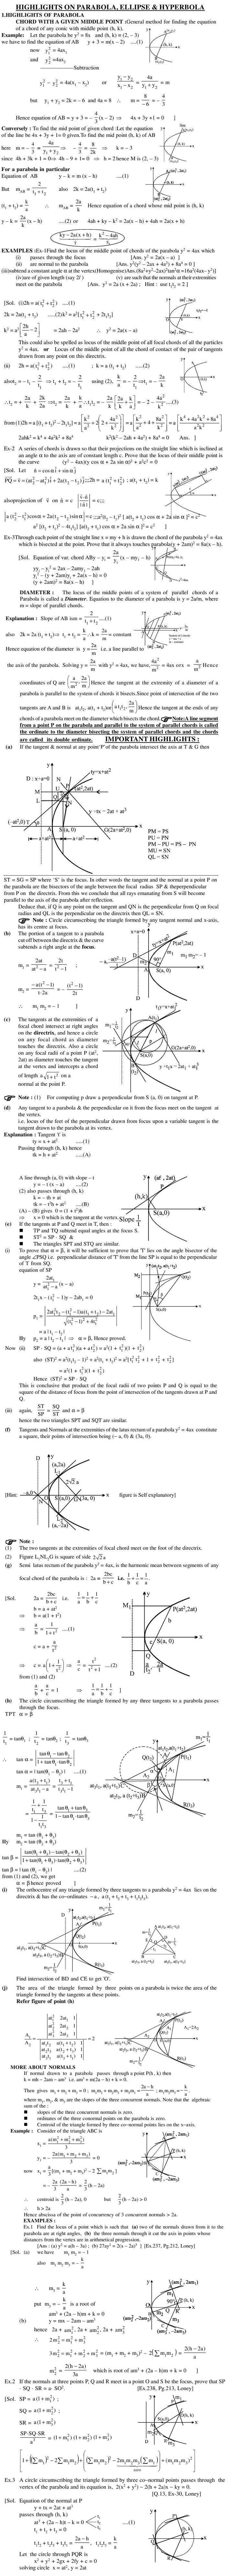 Maths Study Material - Chapter 20